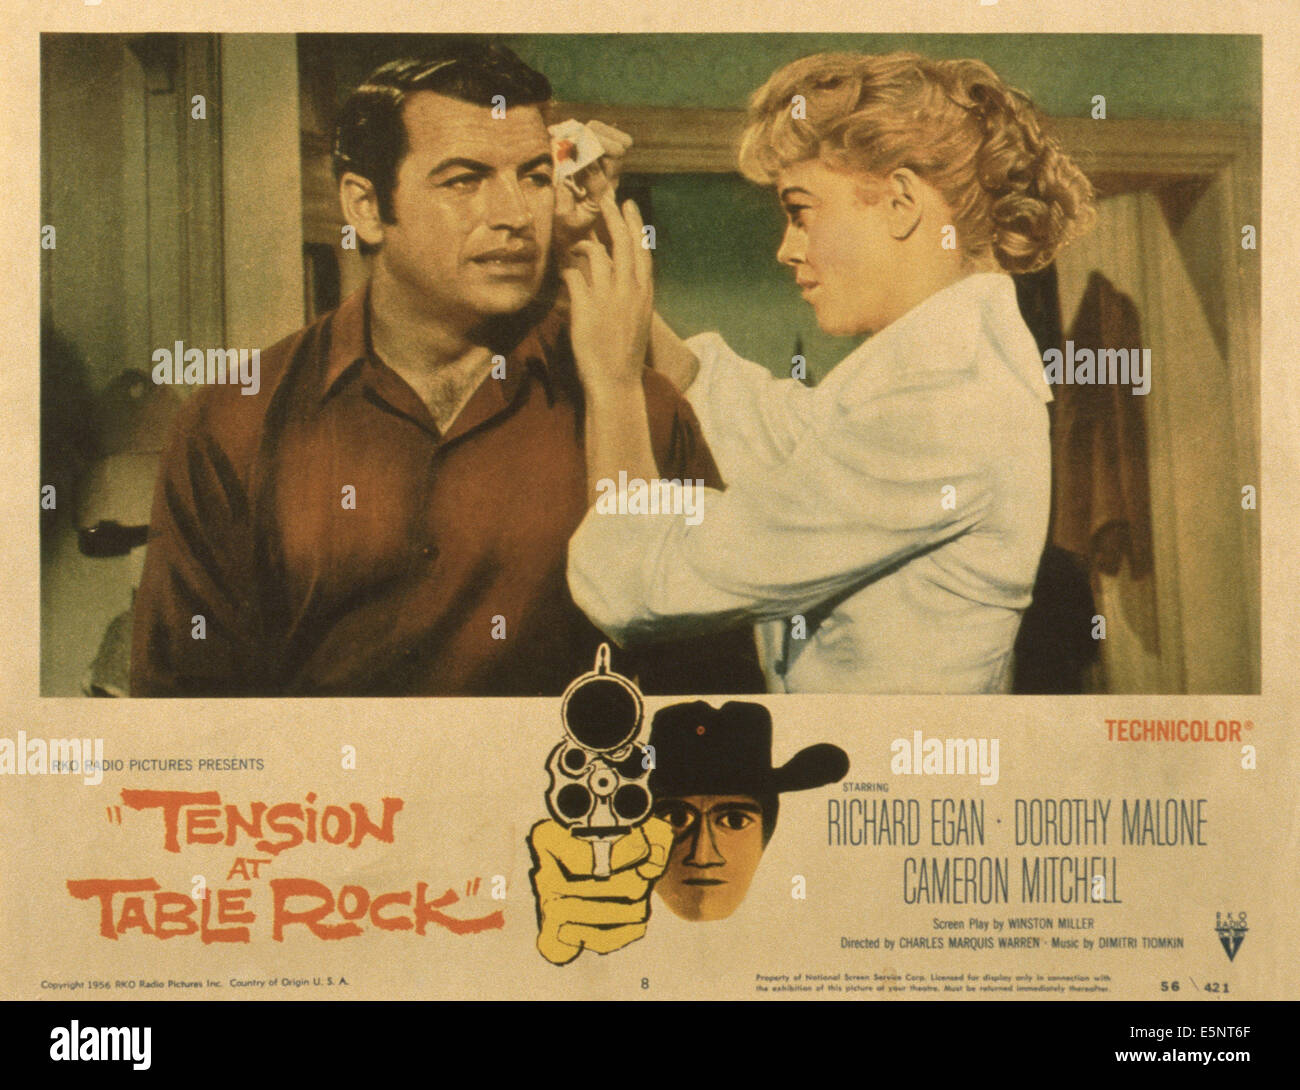 TENSION AT TABLE ROCK, US lobbycard, from left: Richard Egan, Dorothy Malone, 1956 Stock Photo